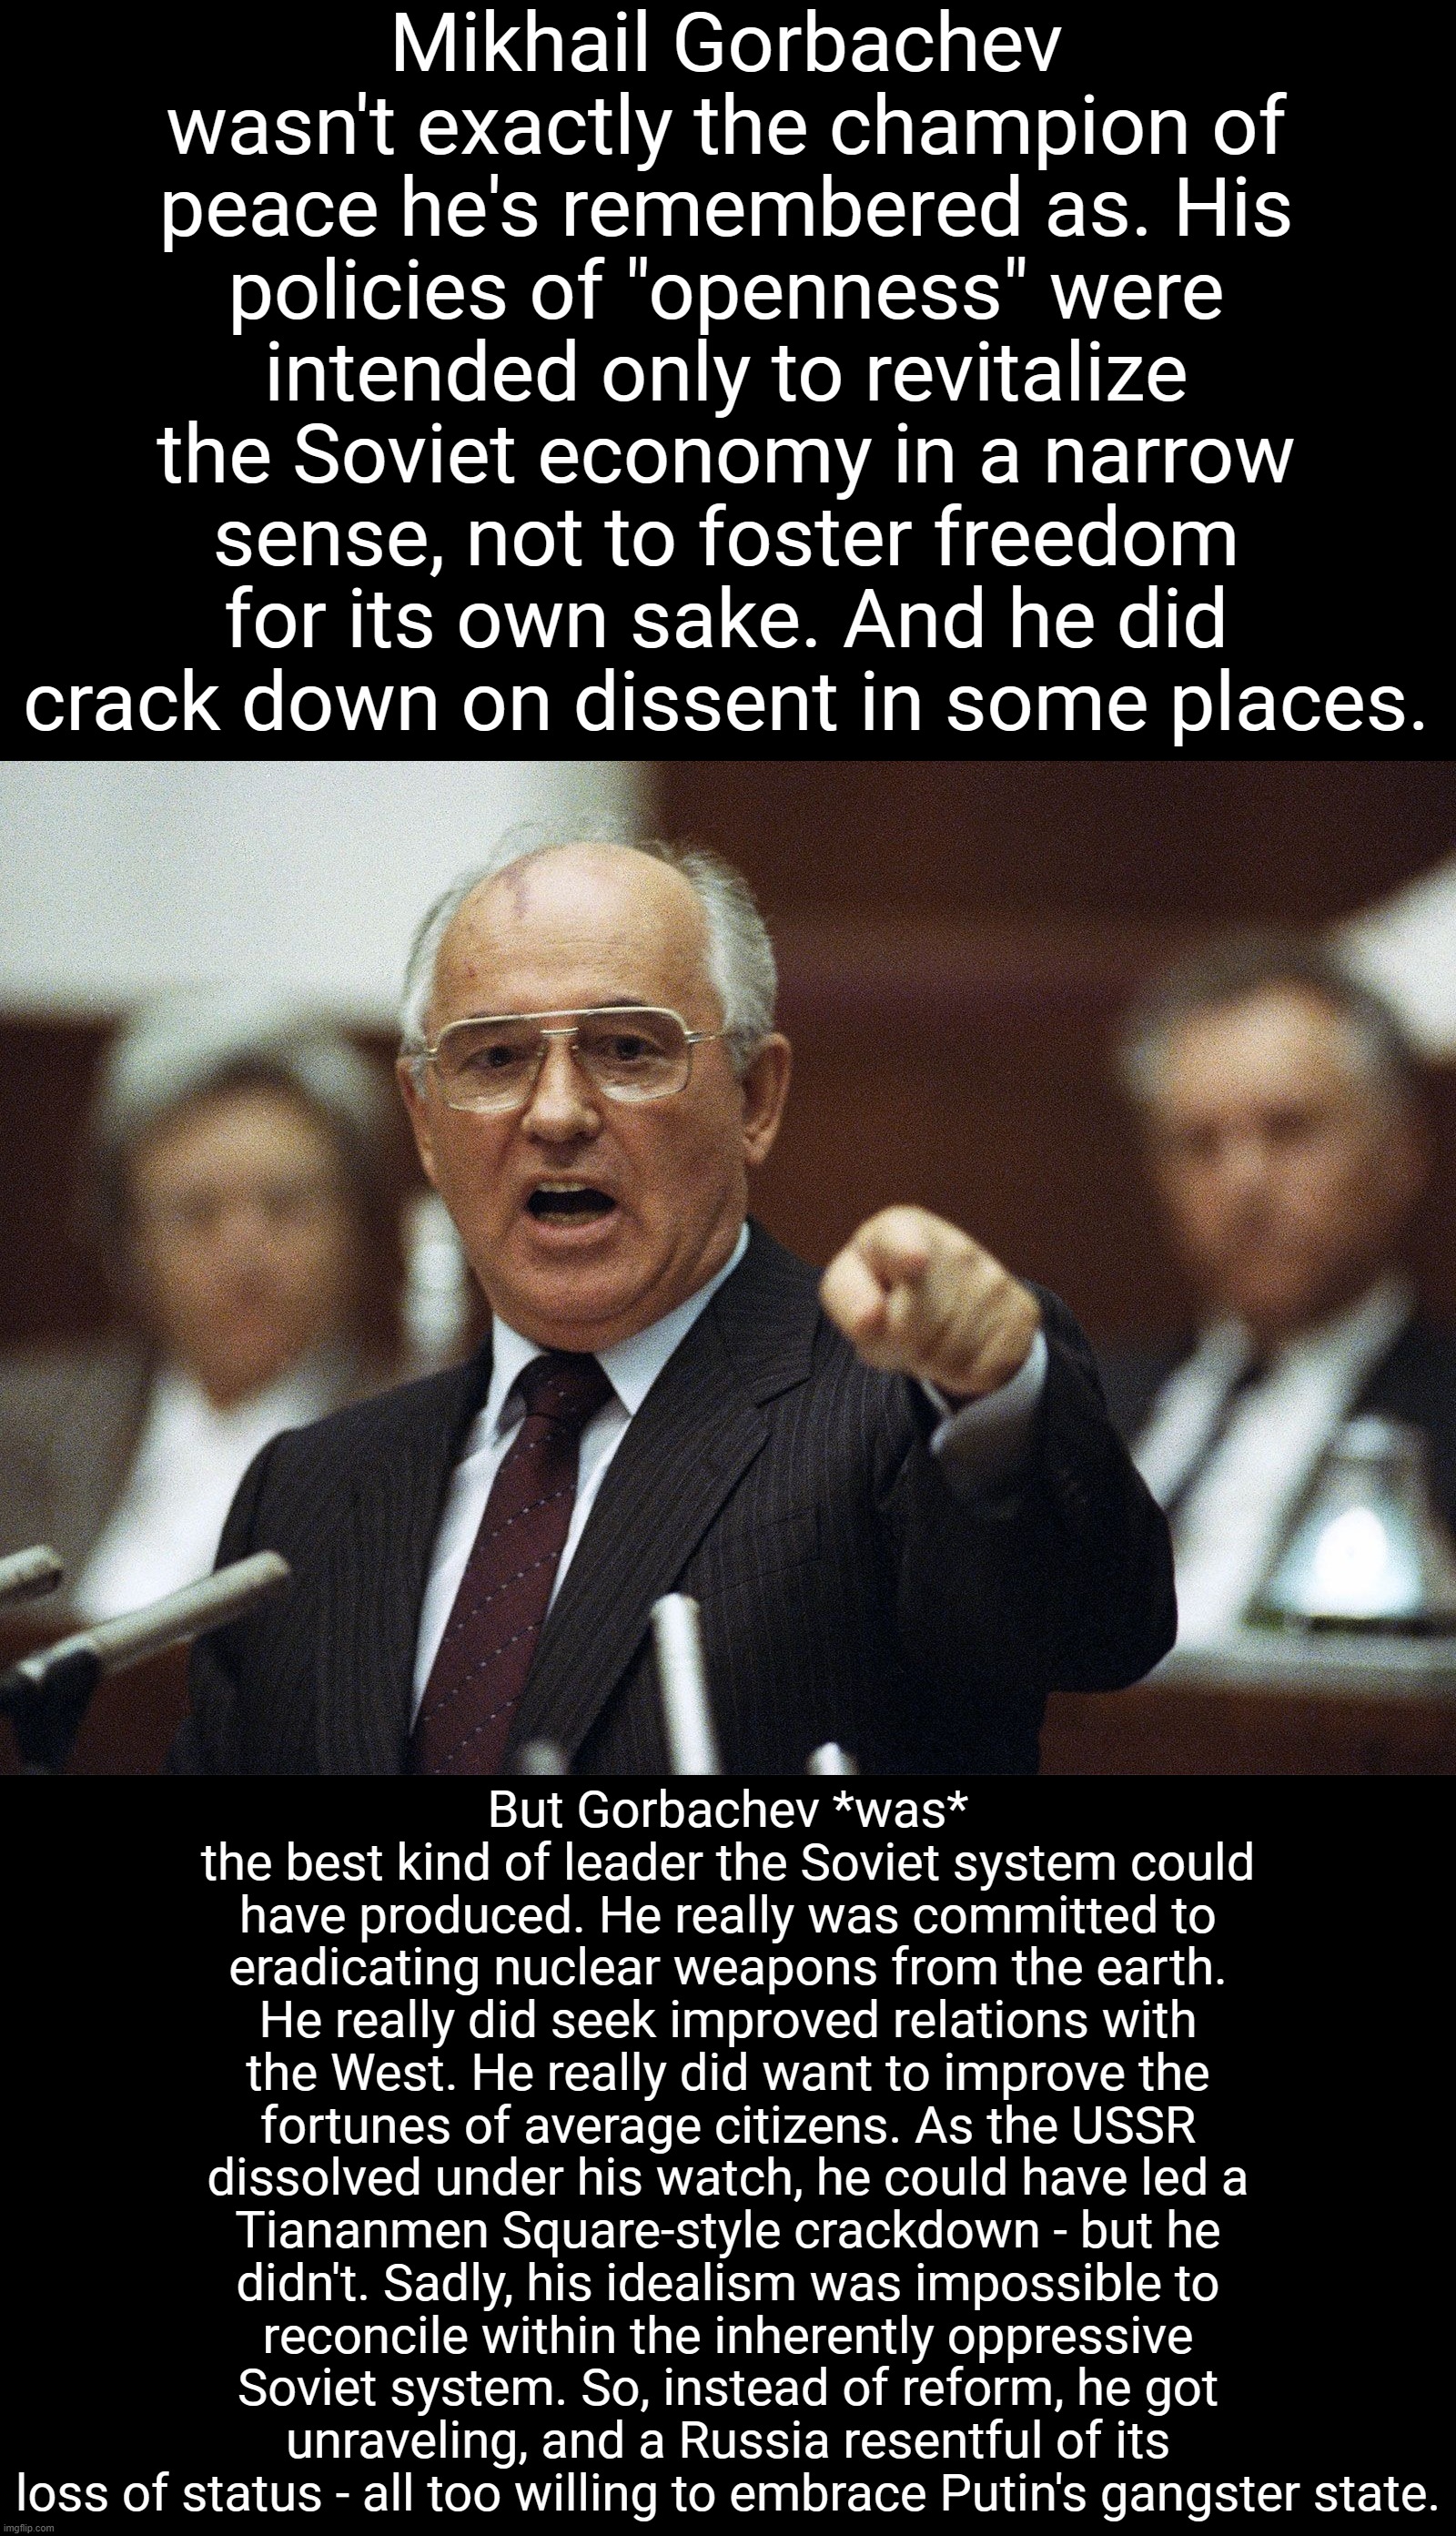 Gorbachev's tragedy still haunts us to this day. R.I.P. to a genuine leader. | Mikhail Gorbachev wasn't exactly the champion of peace he's remembered as. His policies of "openness" were intended only to revitalize the Soviet economy in a narrow sense, not to foster freedom for its own sake. And he did crack down on dissent in some places. But Gorbachev *was* the best kind of leader the Soviet system could have produced. He really was committed to eradicating nuclear weapons from the earth. He really did seek improved relations with the West. He really did want to improve the fortunes of average citizens. As the USSR dissolved under his watch, he could have led a Tiananmen Square-style crackdown - but he didn't. Sadly, his idealism was impossible to reconcile within the inherently oppressive Soviet system. So, instead of reform, he got unraveling, and a Russia resentful of its loss of status - all too willing to embrace Putin's gangster state. | image tagged in mikhail gorbachev | made w/ Imgflip meme maker